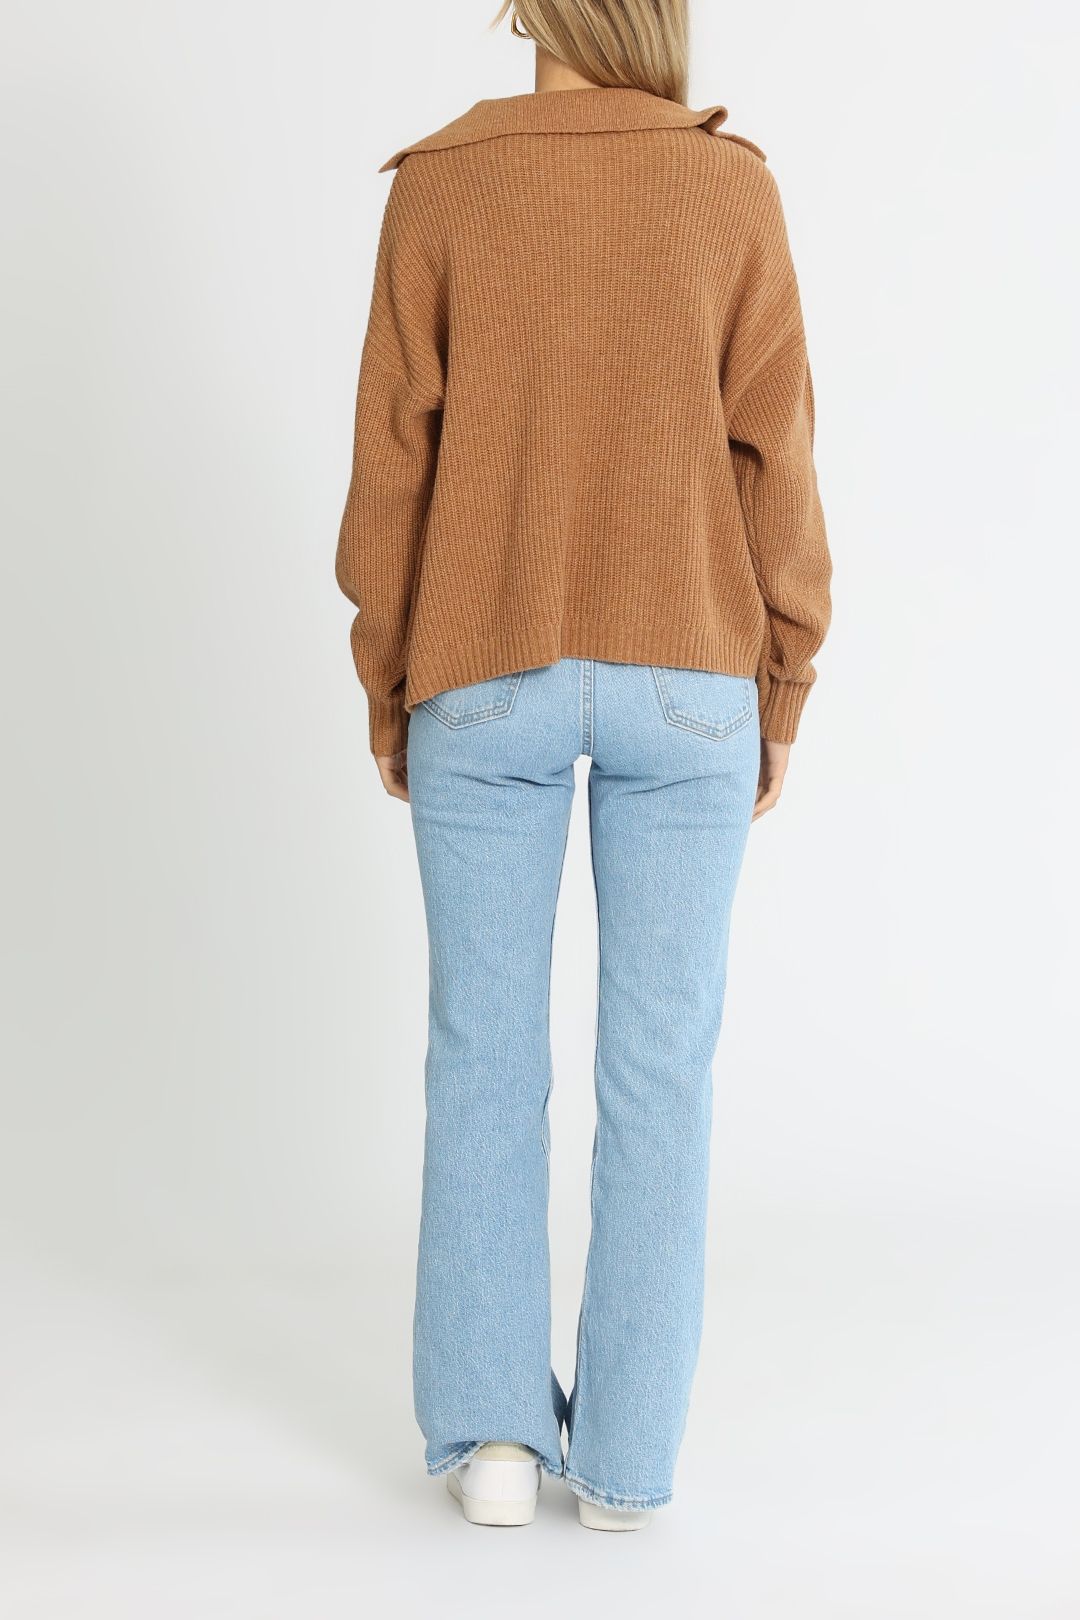 LMND Ava Collared Sweater Tan Relaxed Fit